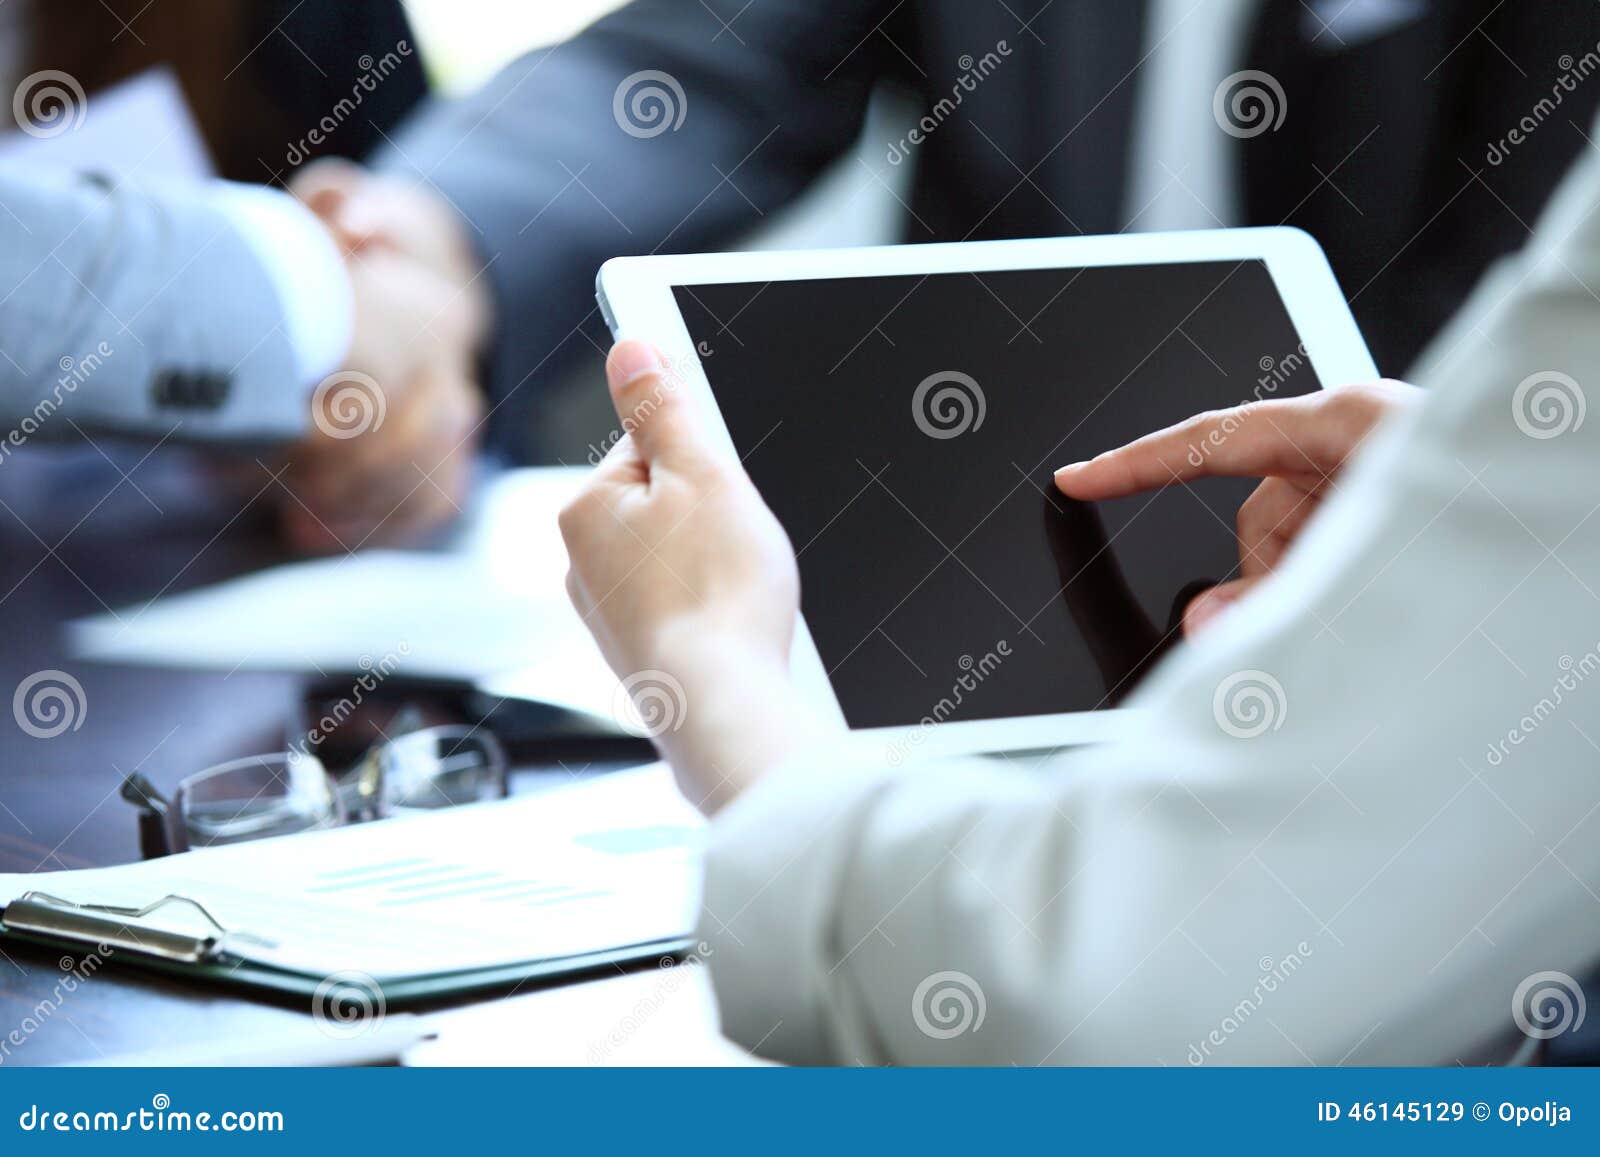 office worker using a touchpad to analyze statistical data